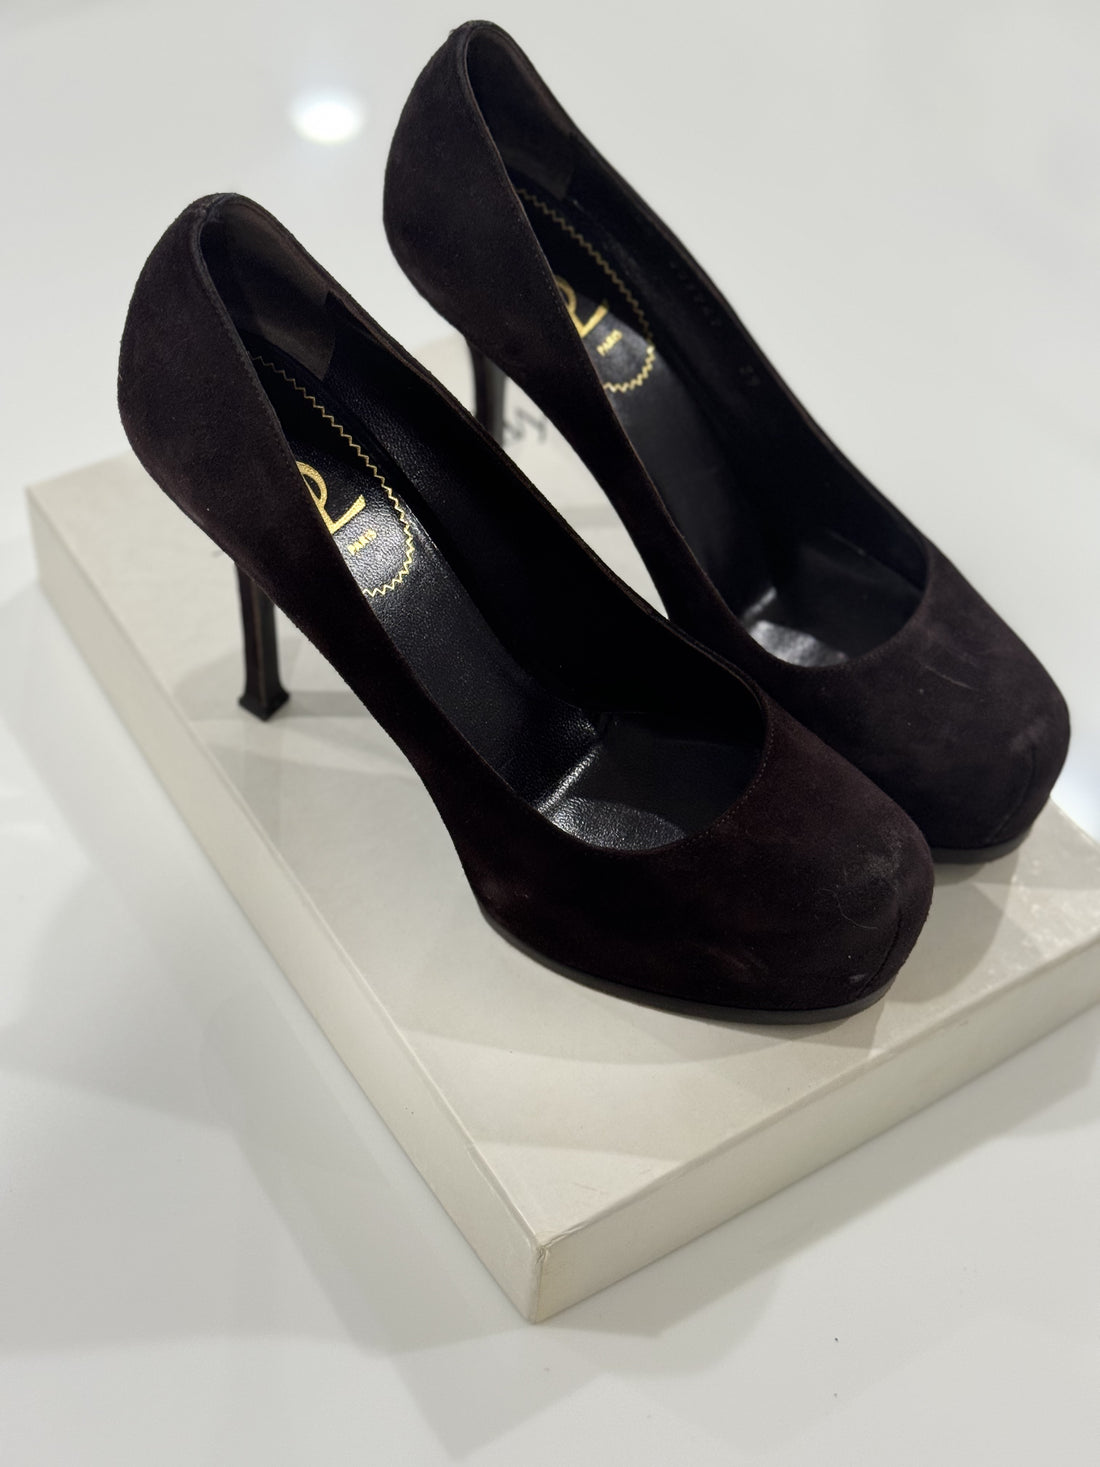 YSL Tribtoo Suede Chocolate Brown Pumps- size 39